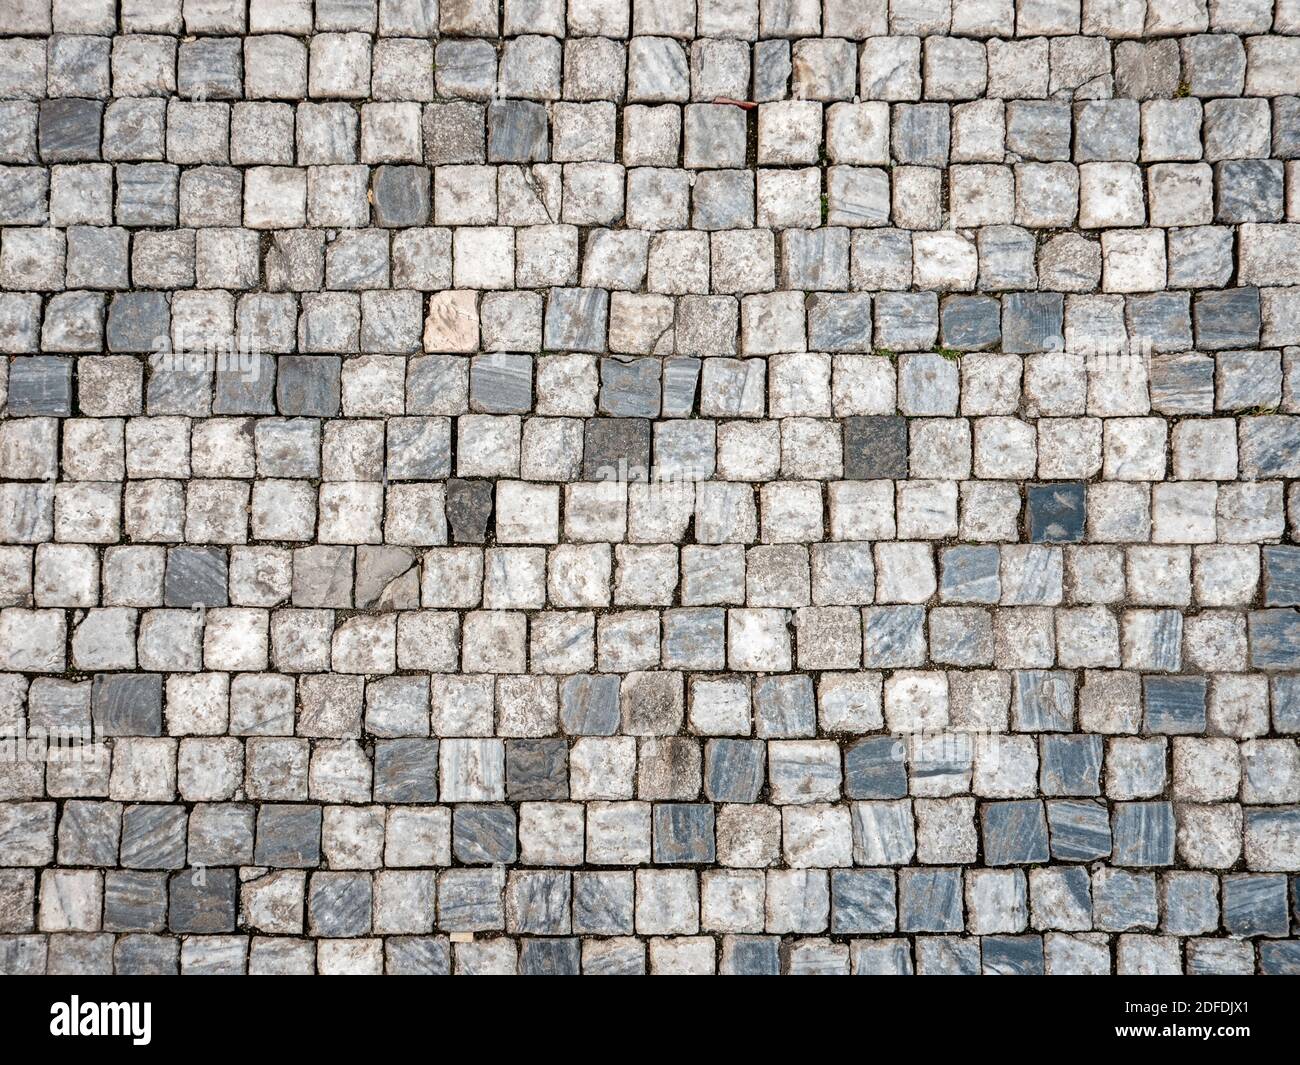 Cobbles. Abstract background texture of marble cobble stones in the Old Town district of Prague, Czech Republic. Stock Photo